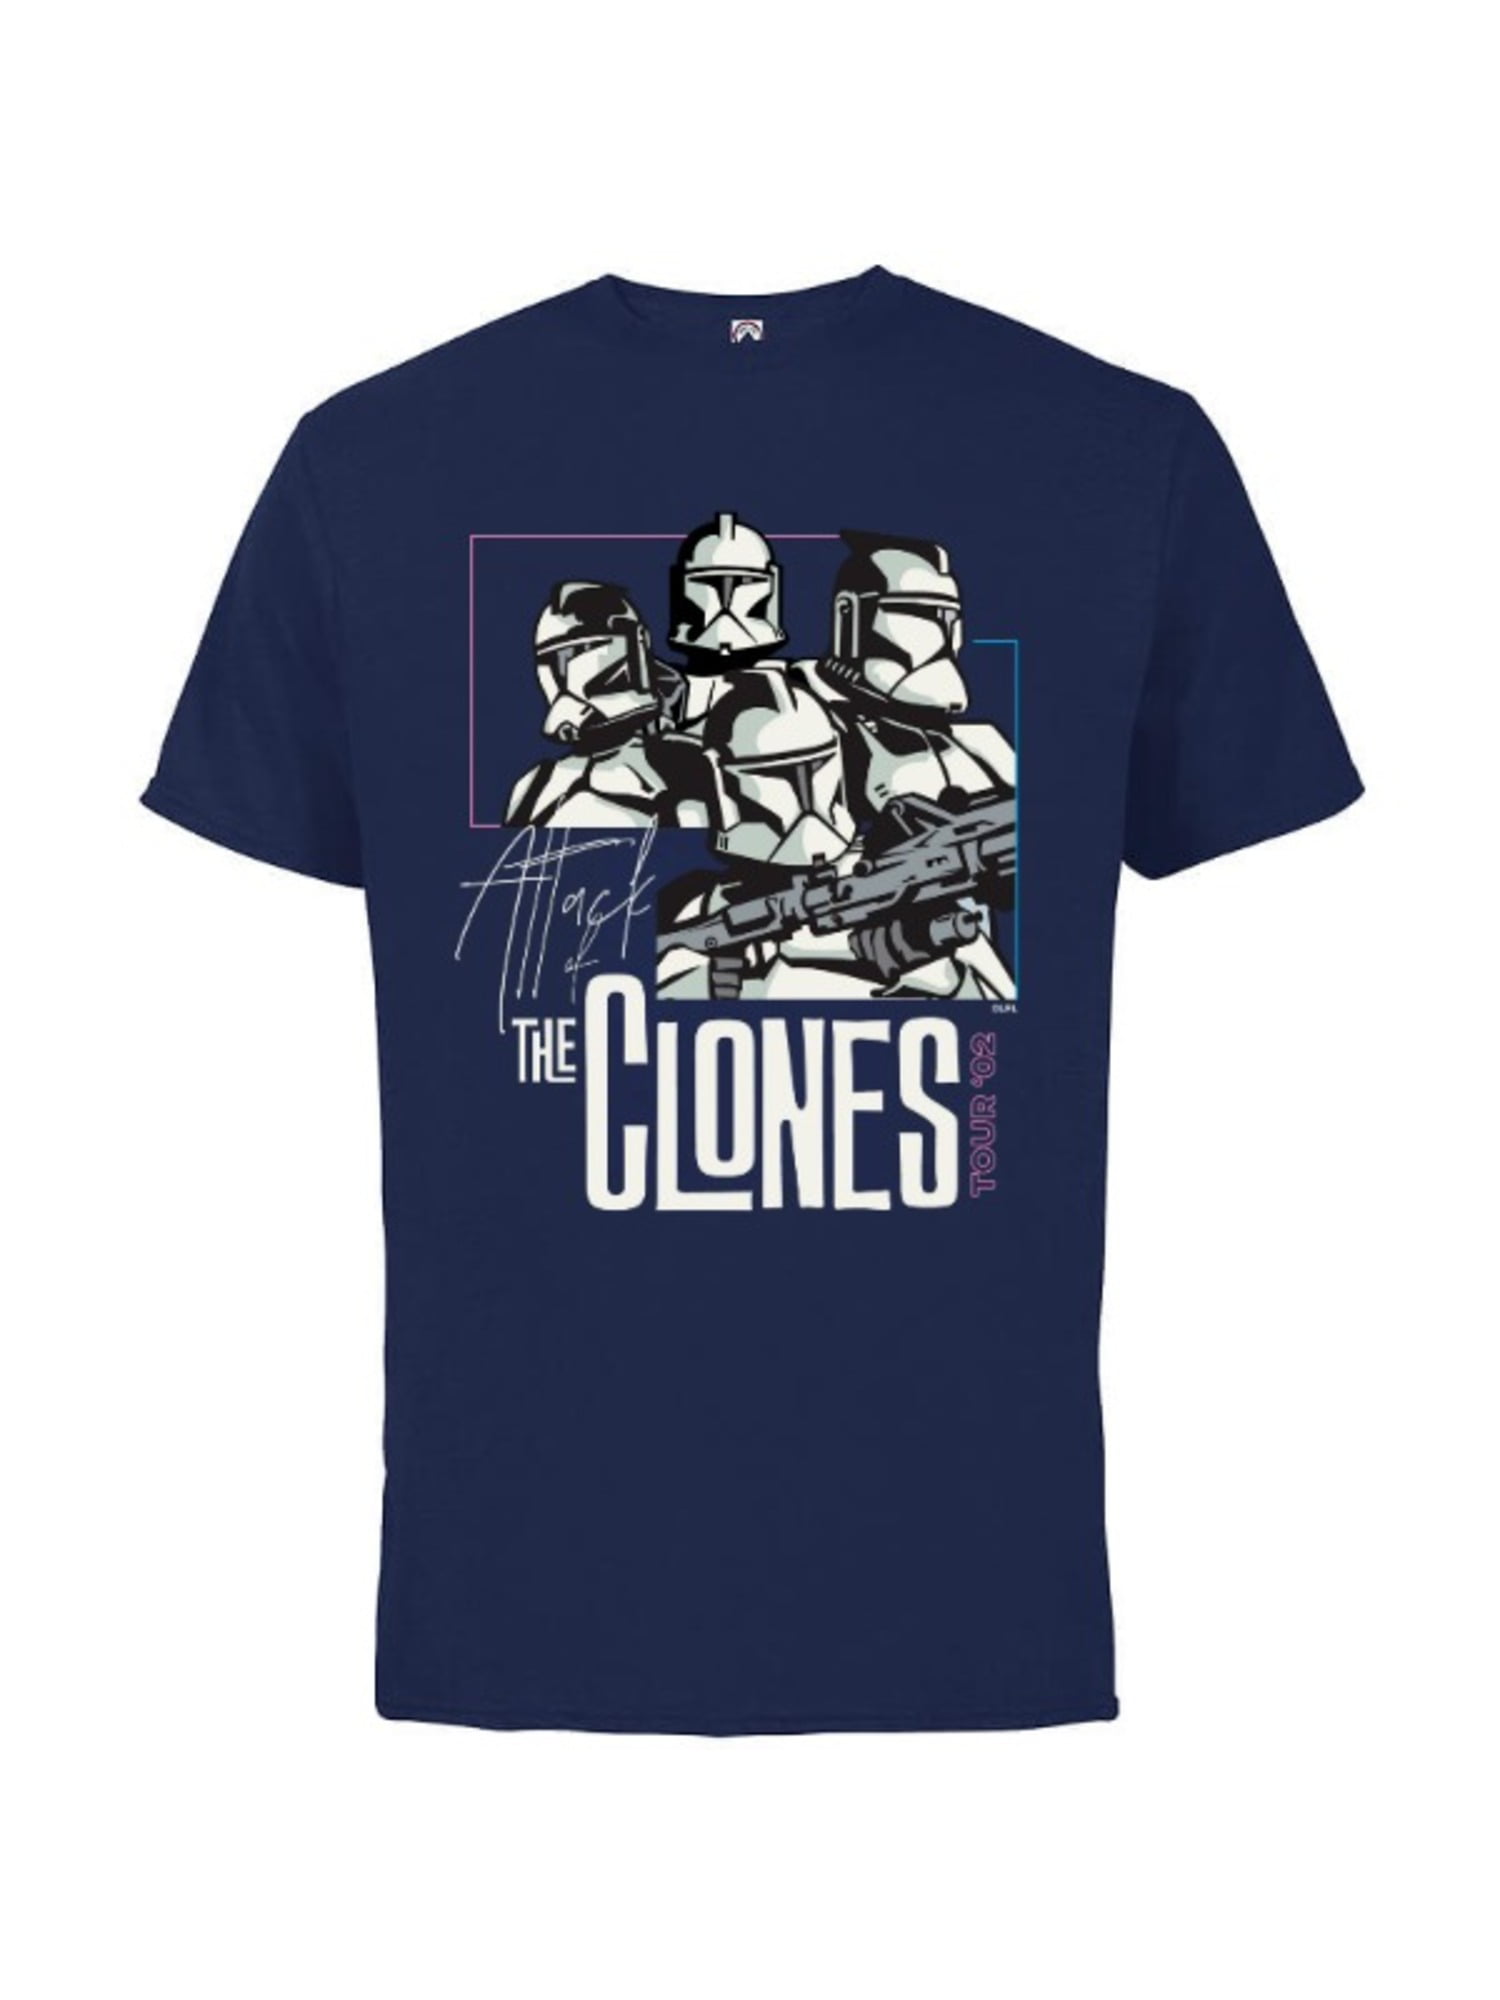 Star Wars The Clones Tour '02 - Short Sleeve Cotton T-Shirt for Adults -  Customized-Athletic Navy - Walmart.com